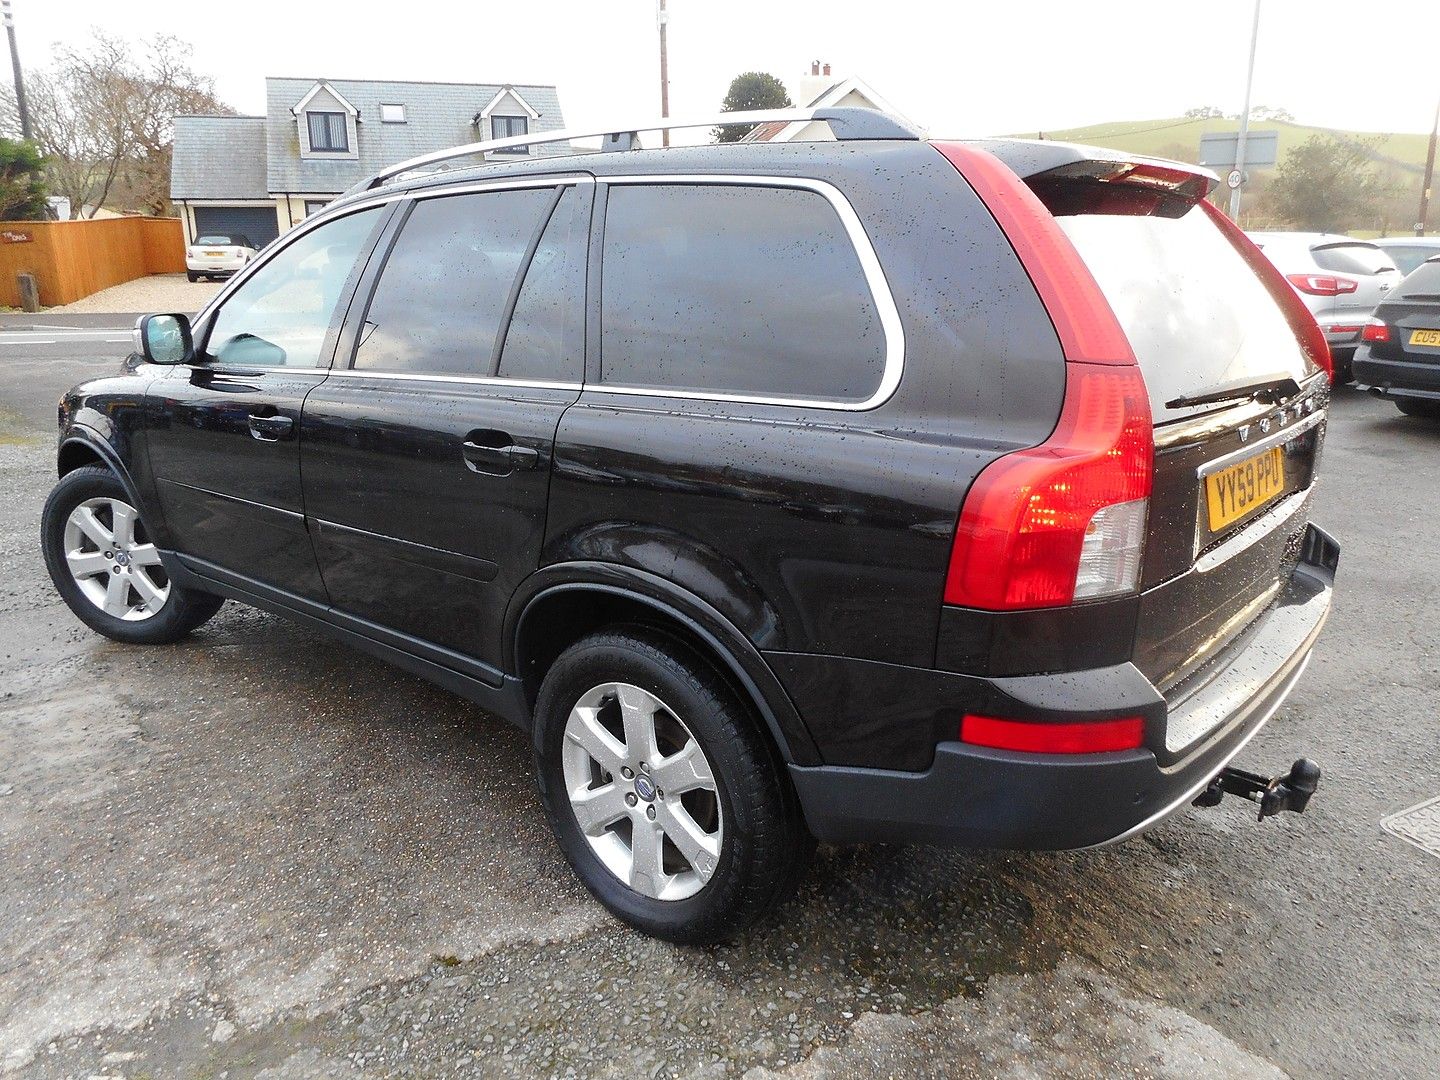 VOLVO XC90 D5 AWD (185 bhp) Executive Geartronic (2009) - Picture 4